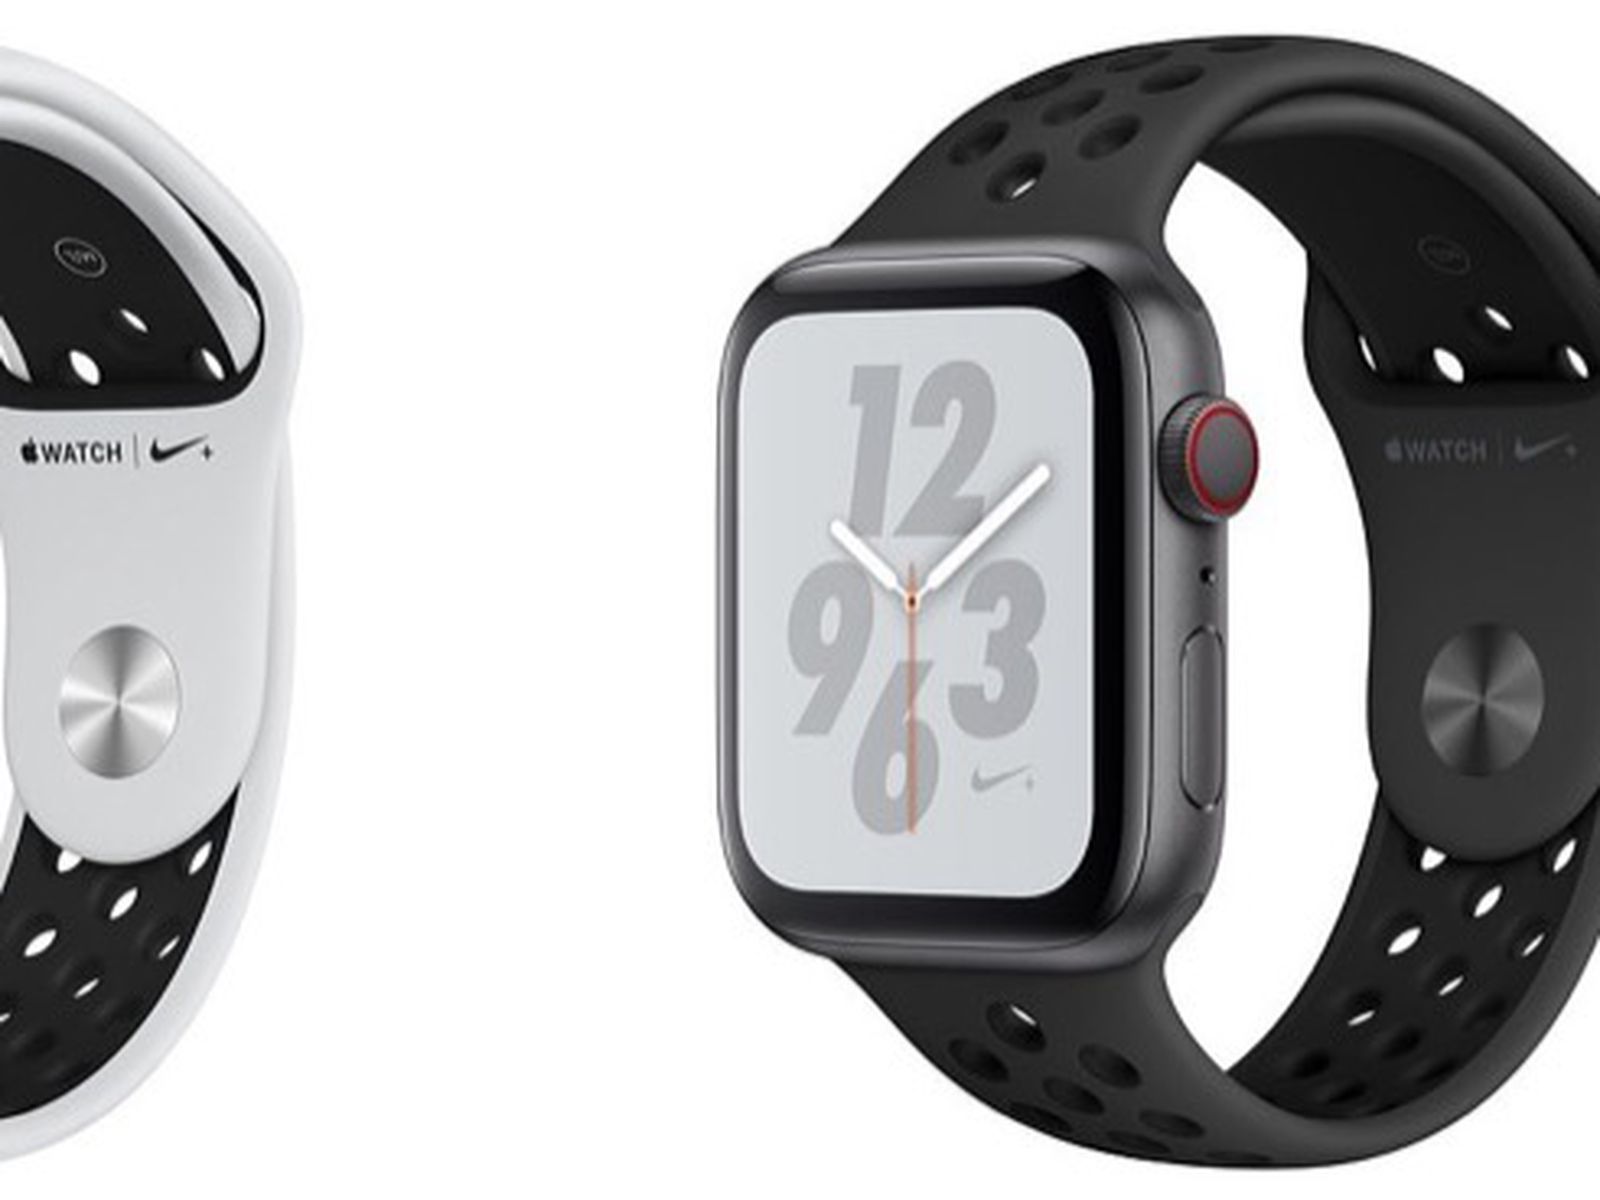 verdad estafa Tamano relativo Apple Watch Nike+ Series 4 Launches With Limited Quantities Available in  Store - MacRumors